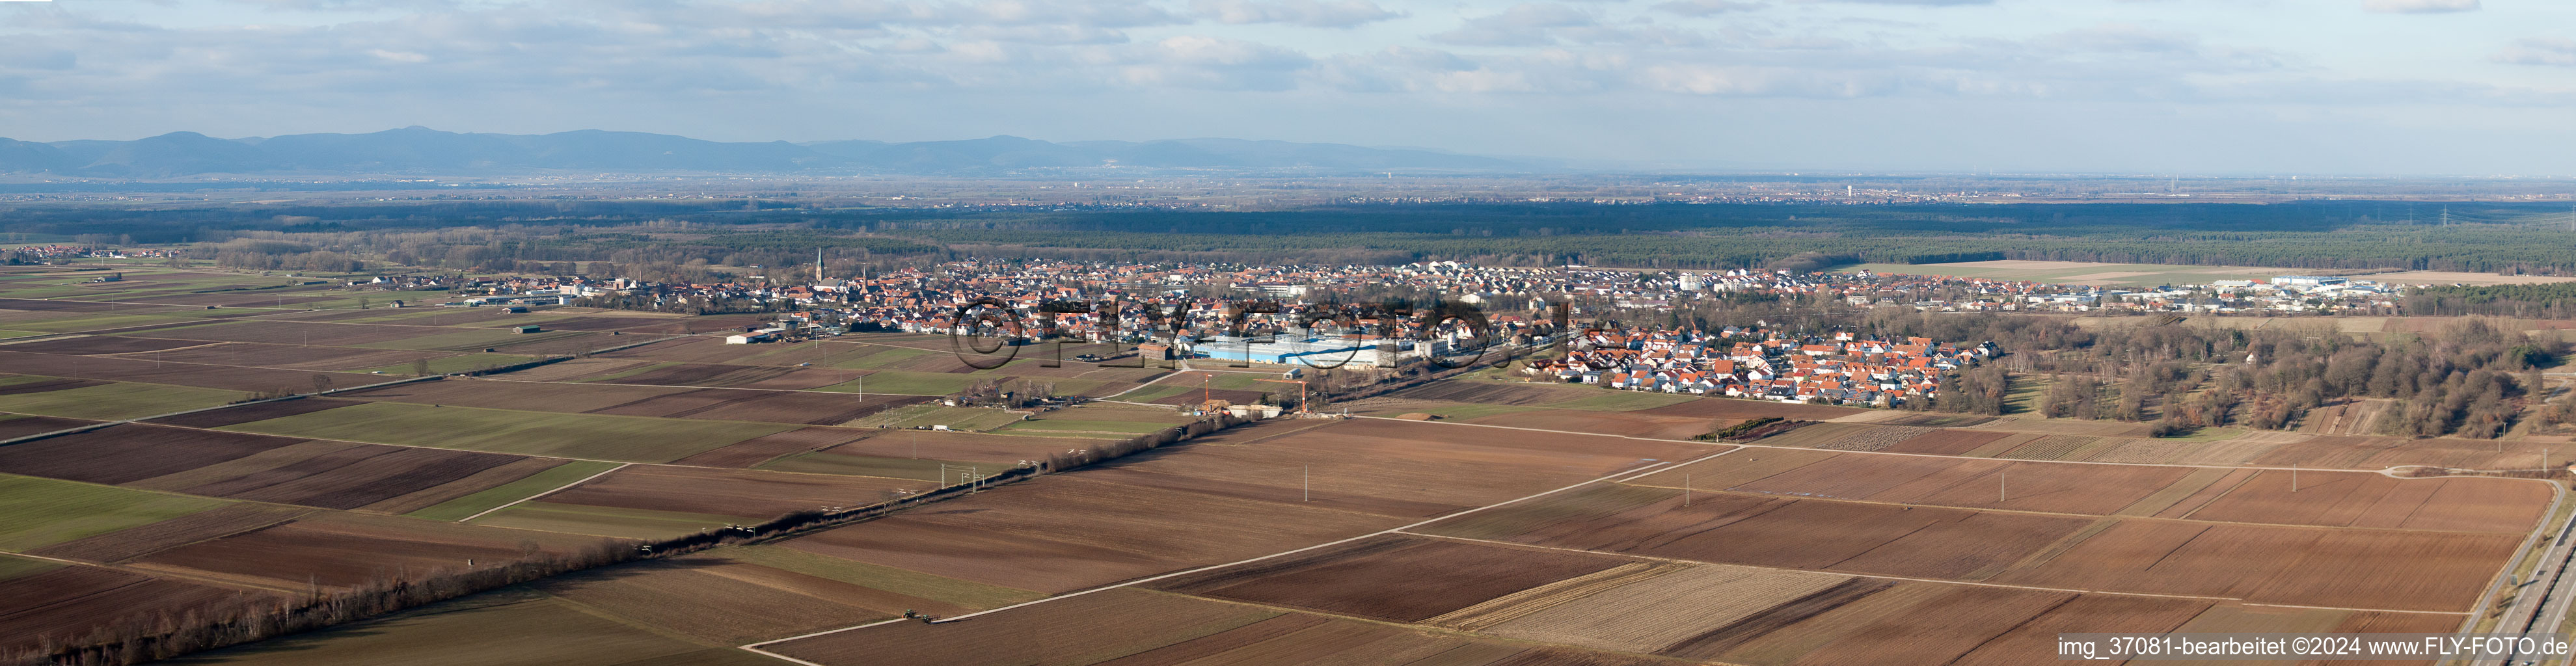 Aerial photograpy of Panorama from the local area and environment in Lustadt in the state Rhineland-Palatinate